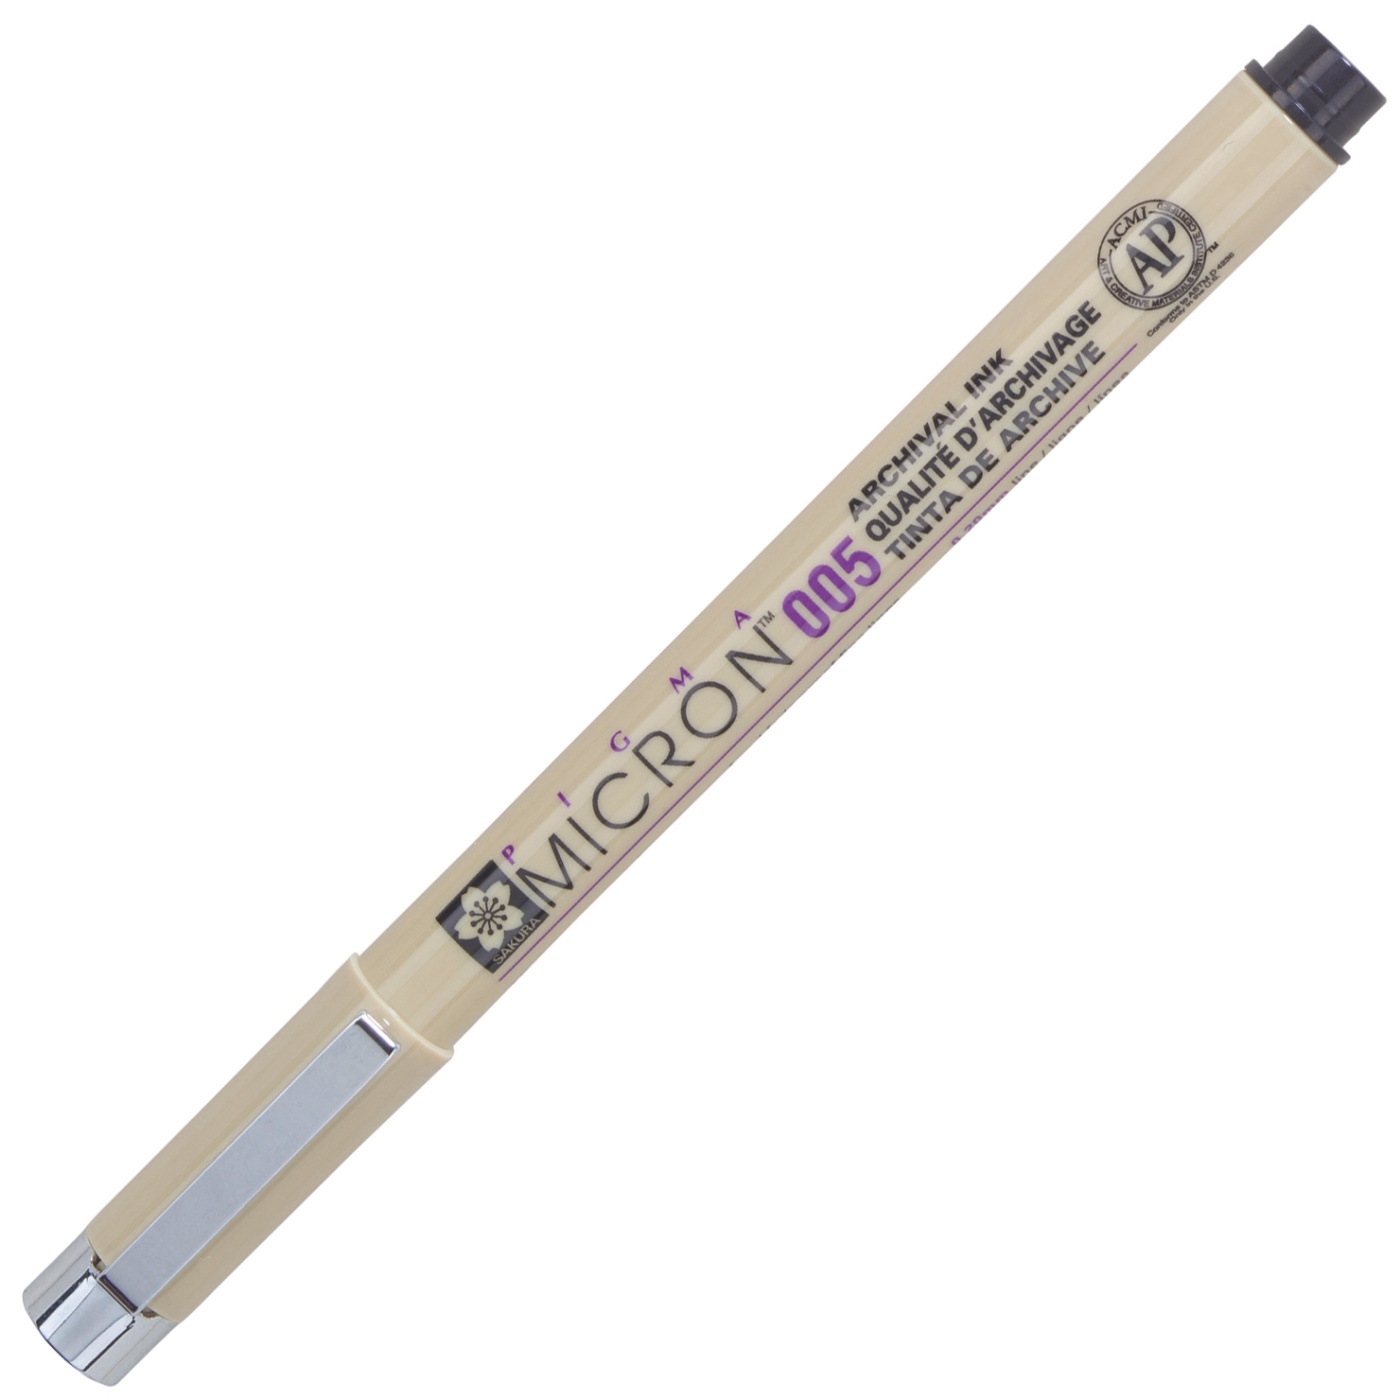 SAKURA Pigma Micron Fineliner Pens - Archival Black and Brown Ink Pens -  Pens for Writing, Drawing, or Journaling - Black and Brown Colored Ink -  003